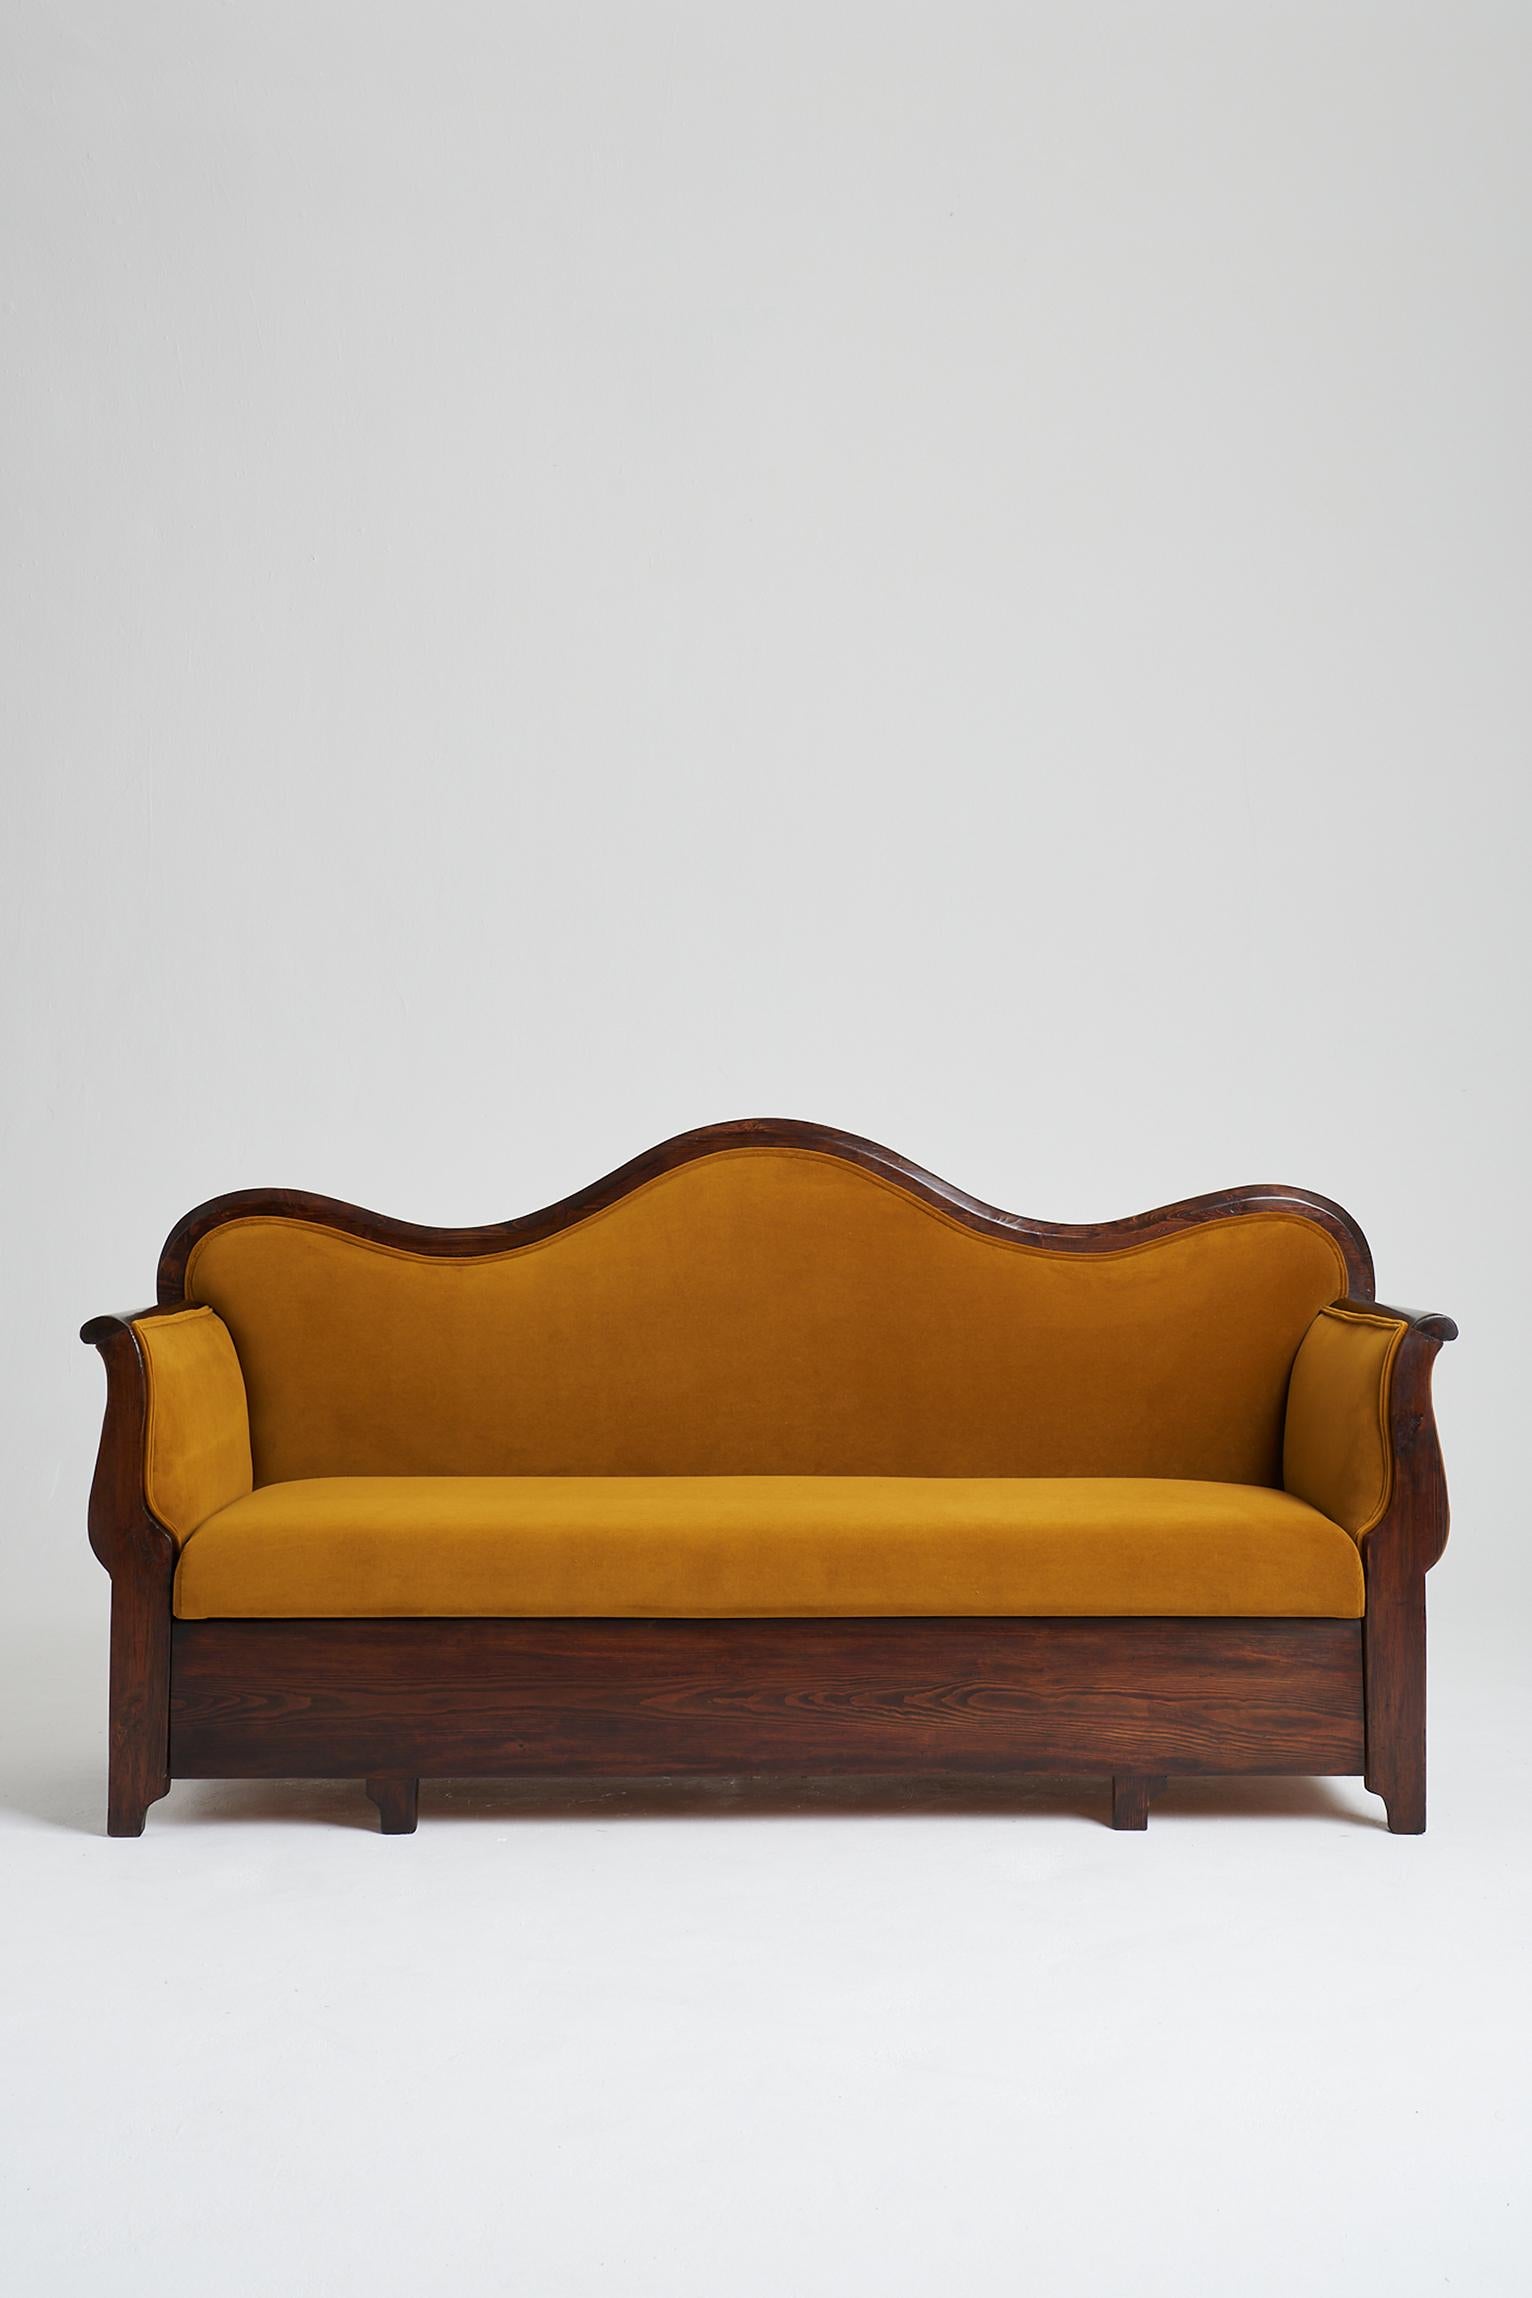 A 19th century stained pine sofa, the curved armrests flanking a bevelled and elegantly wavy back.
Newly upholstered in mustard velvet. 
Sweden, mid 19th century.